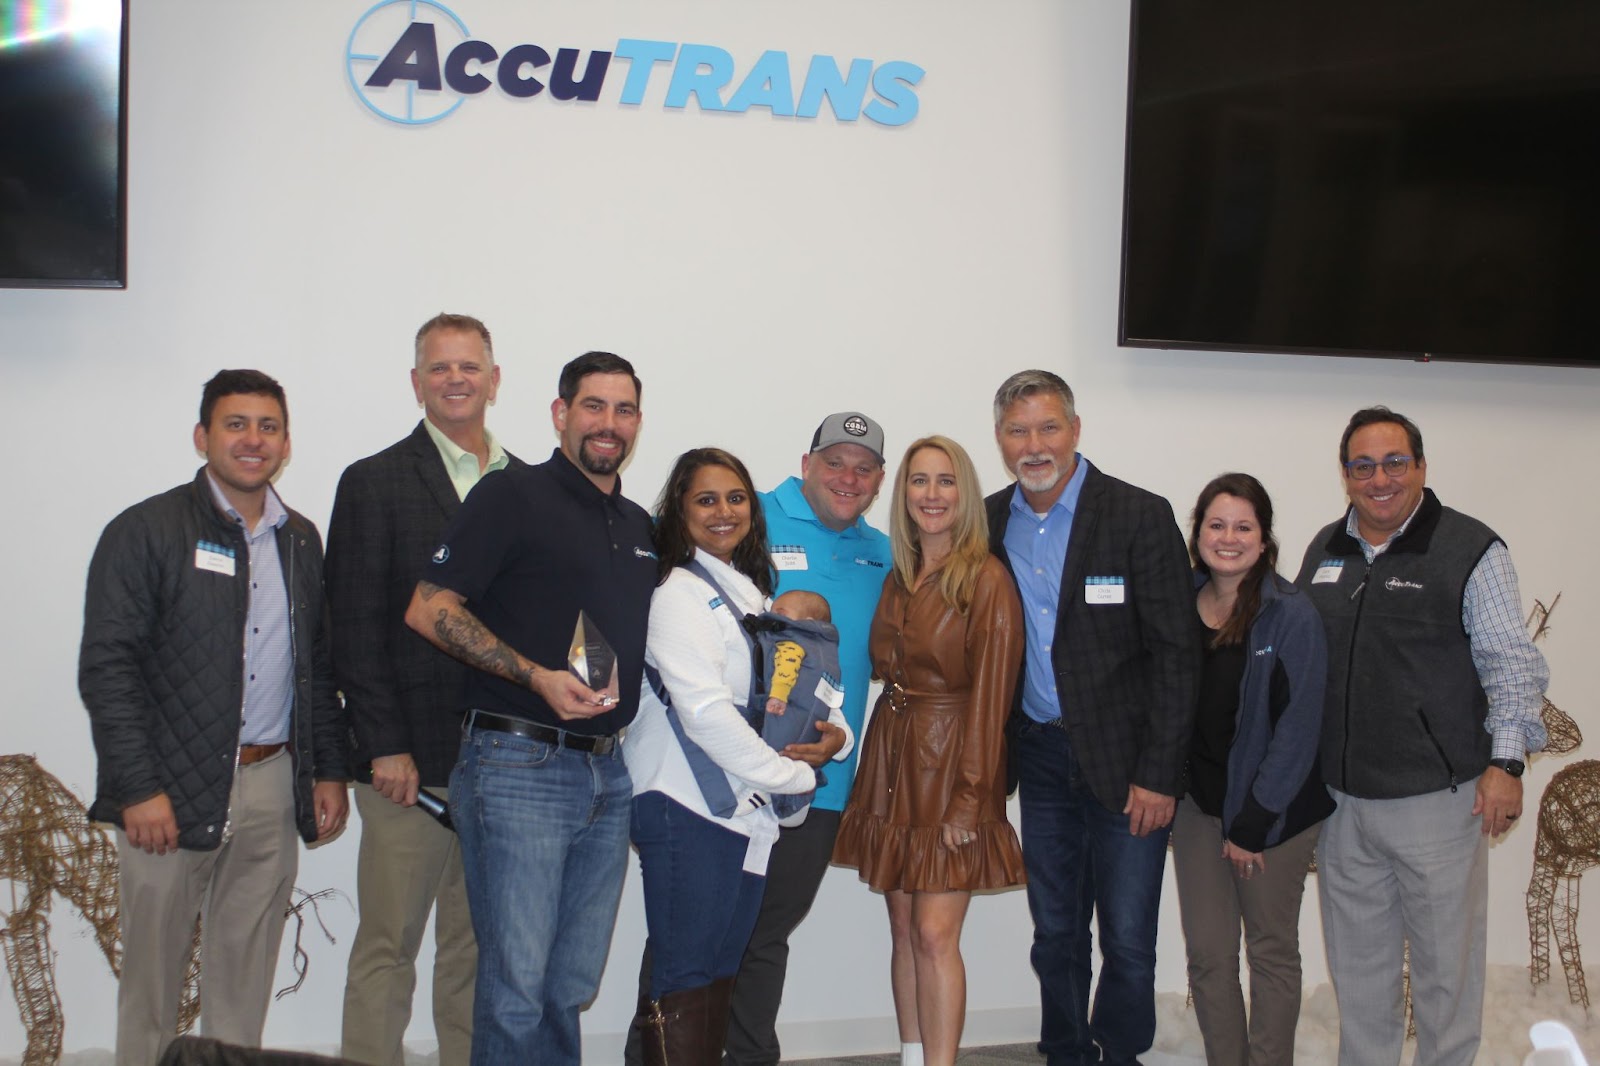 Members of the AccuTRANS family smiling and posing with a winner of the Tenure Award at a Christmas party.